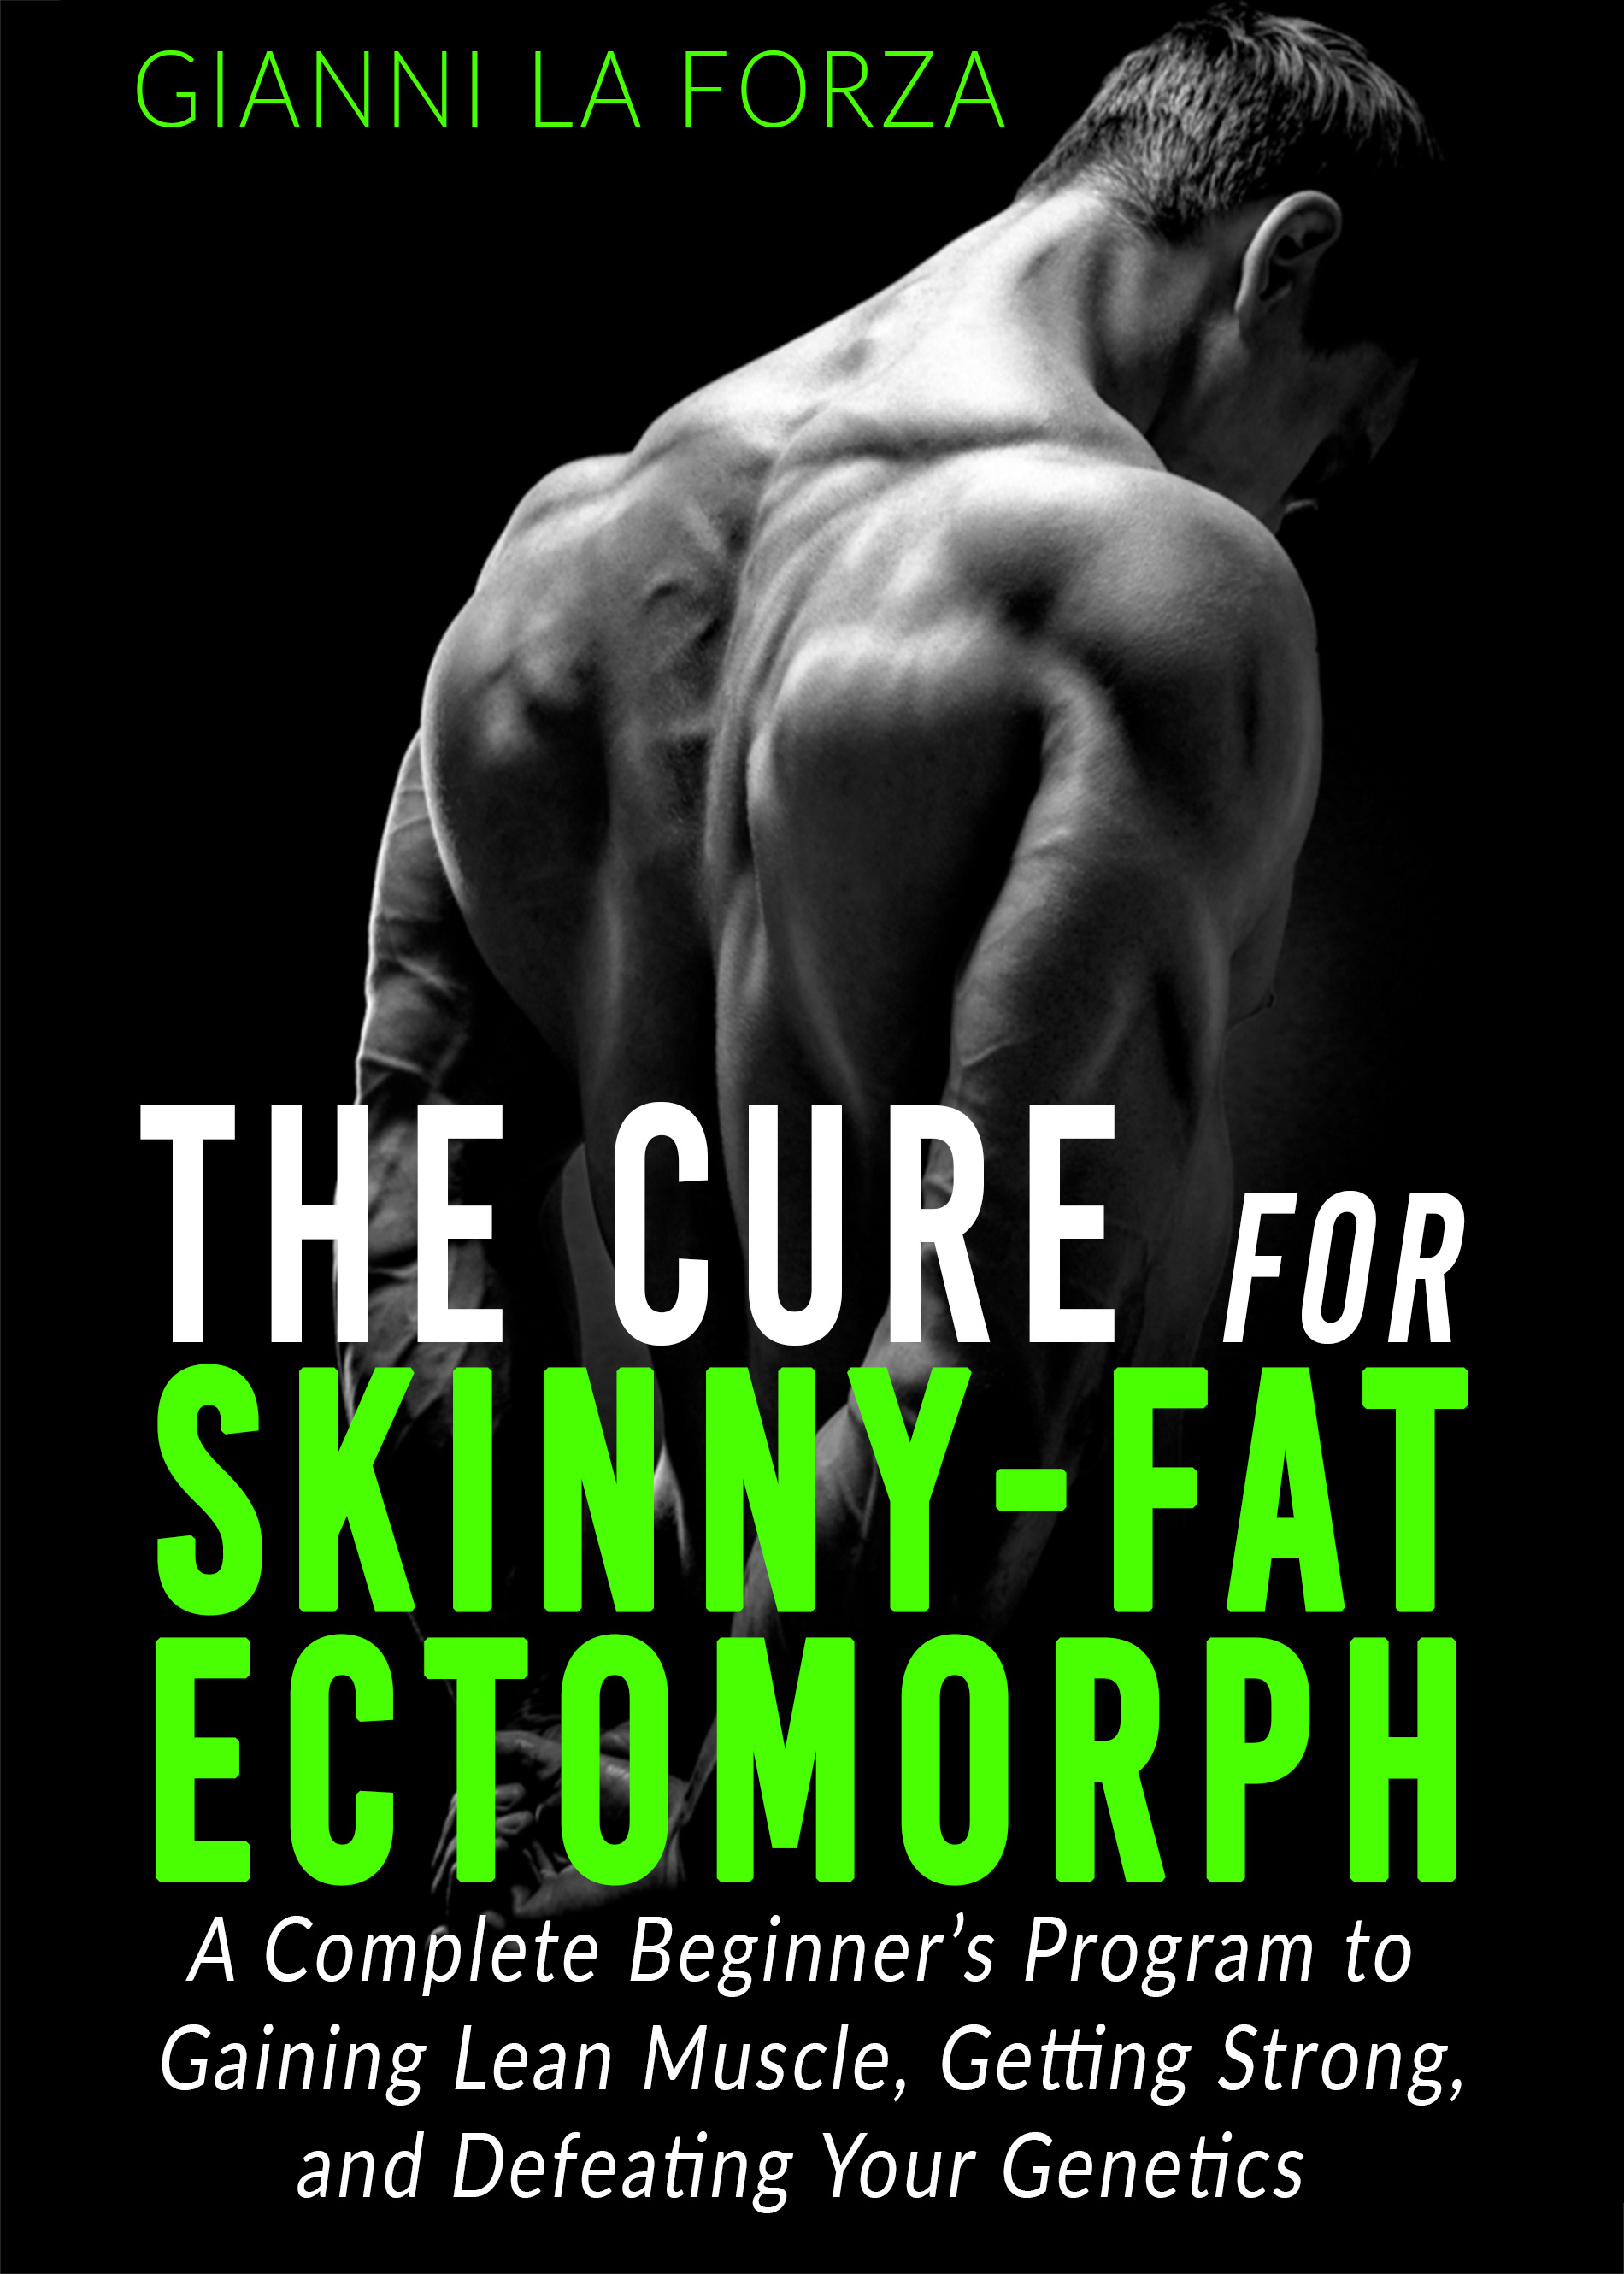 FREE: The Cure for Skinny-Fat Ectomorph by Gianni La Forza